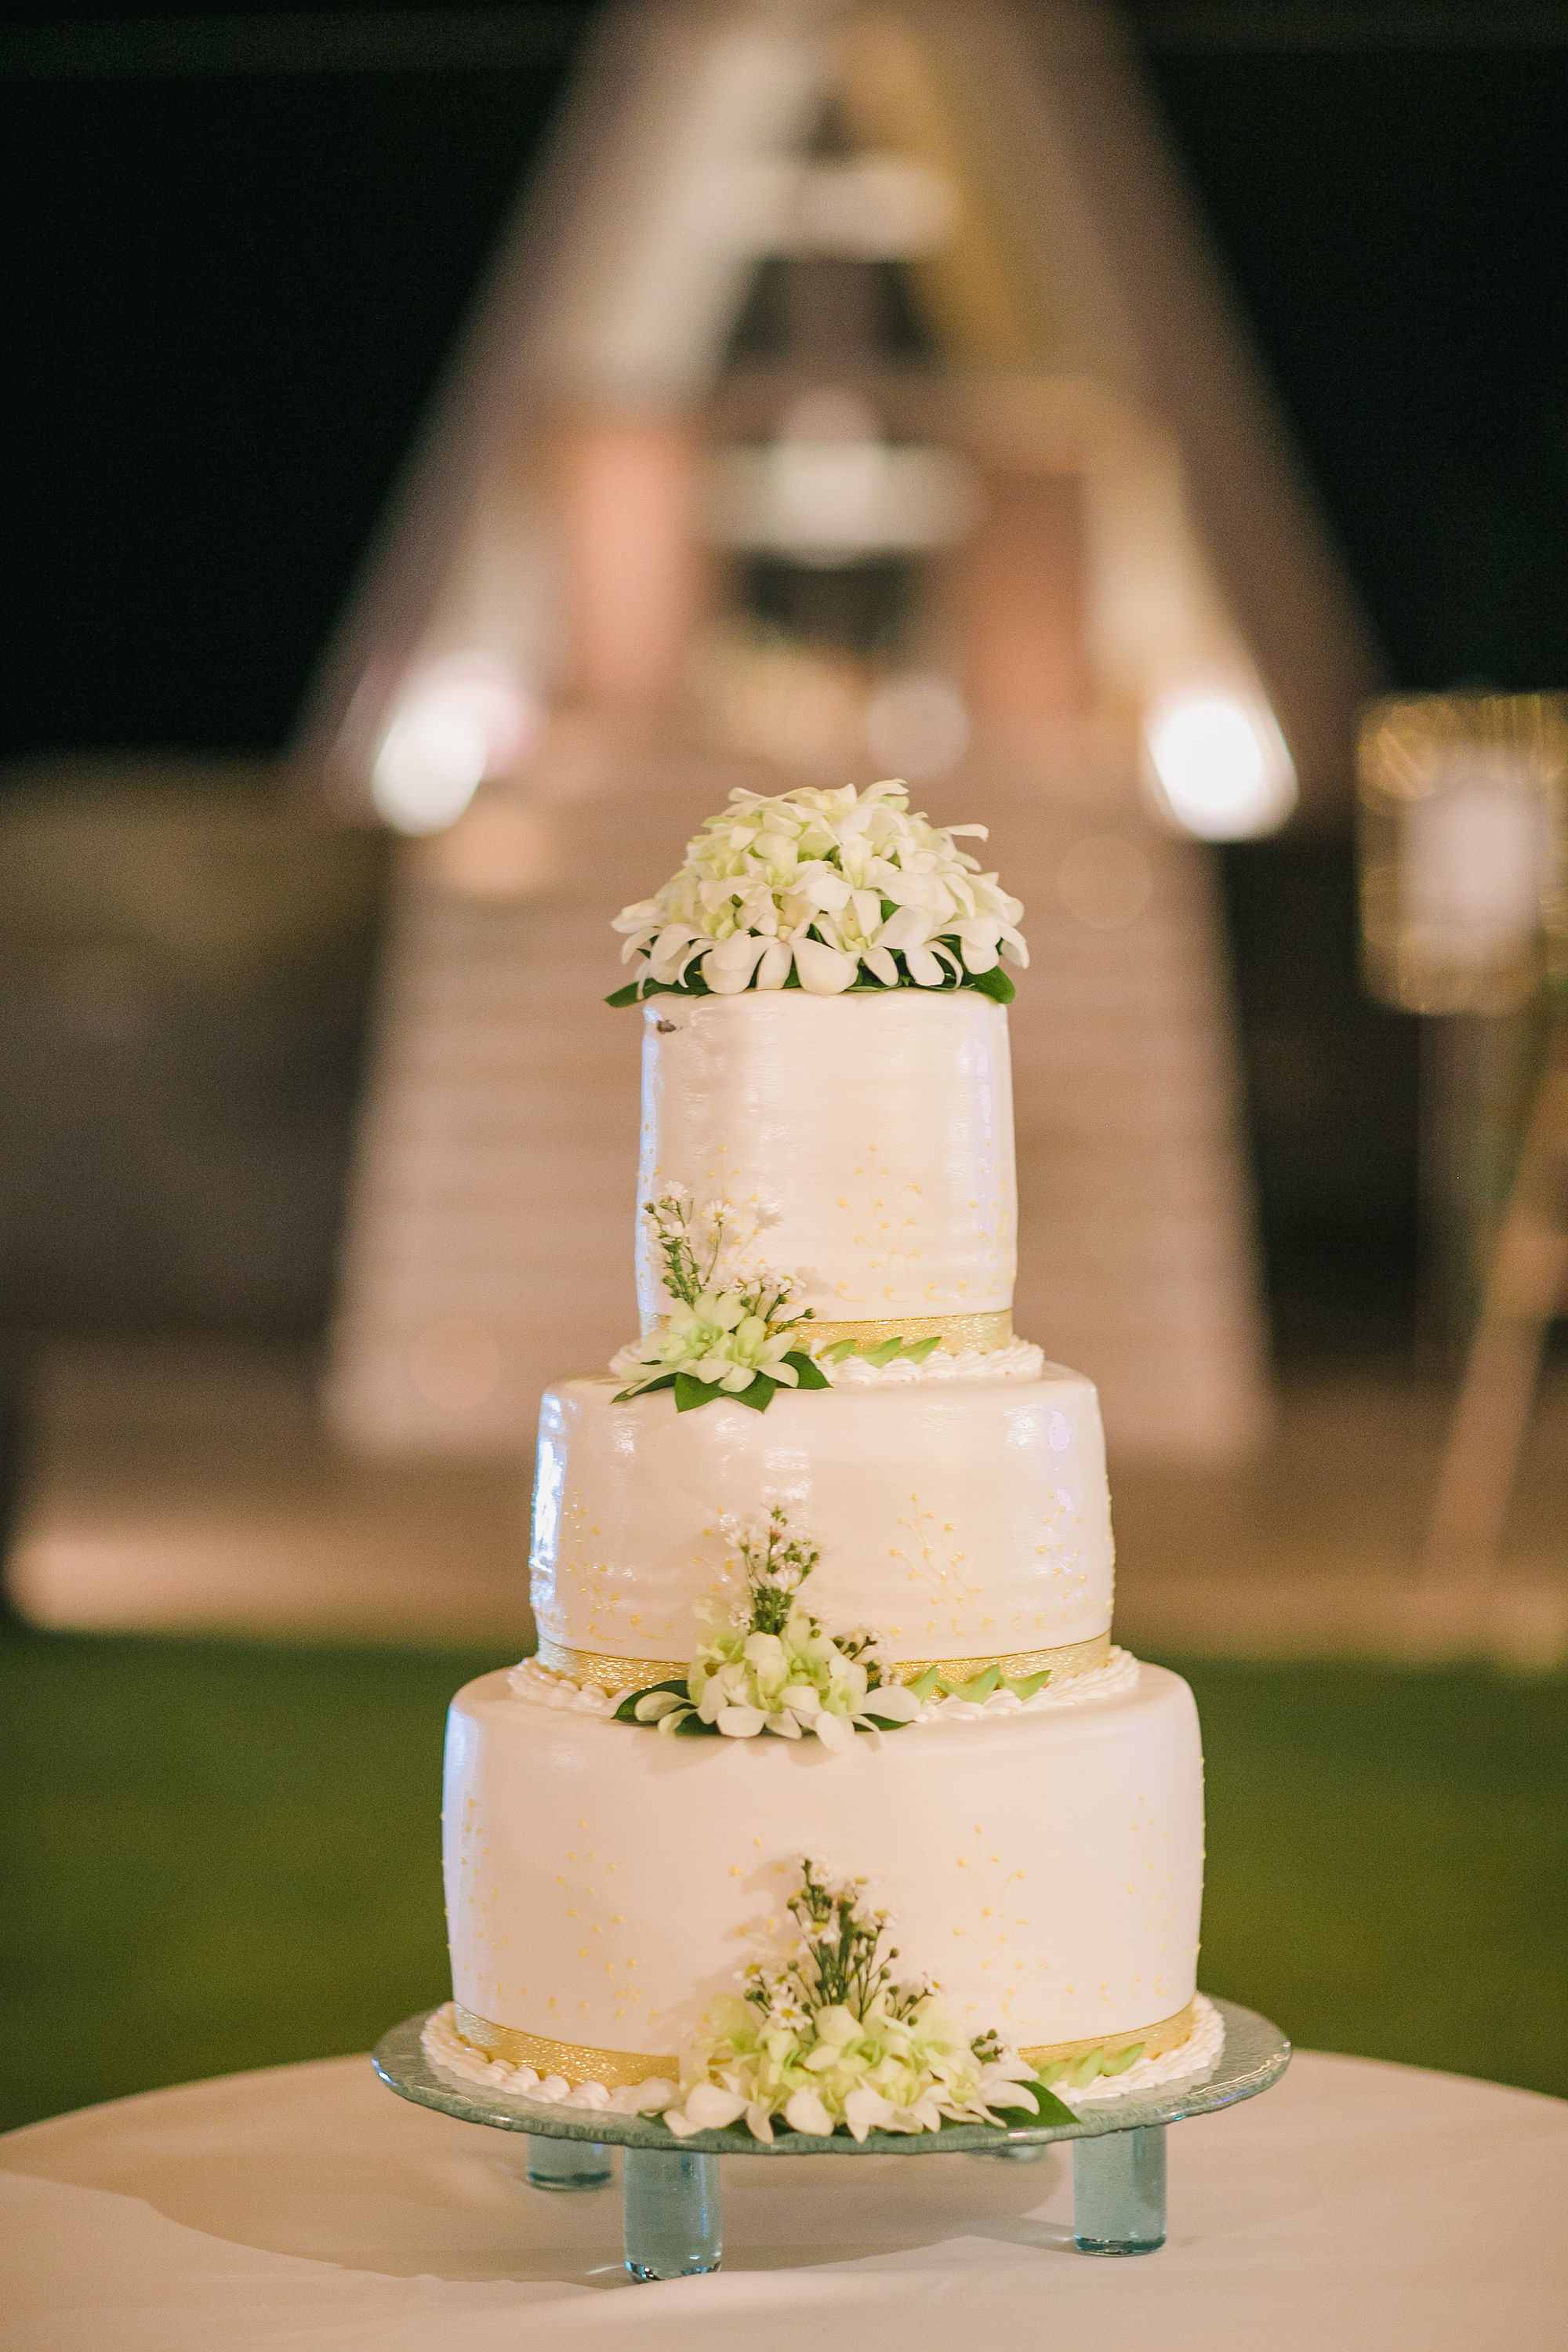 5 things to note when ordering your wedding cake